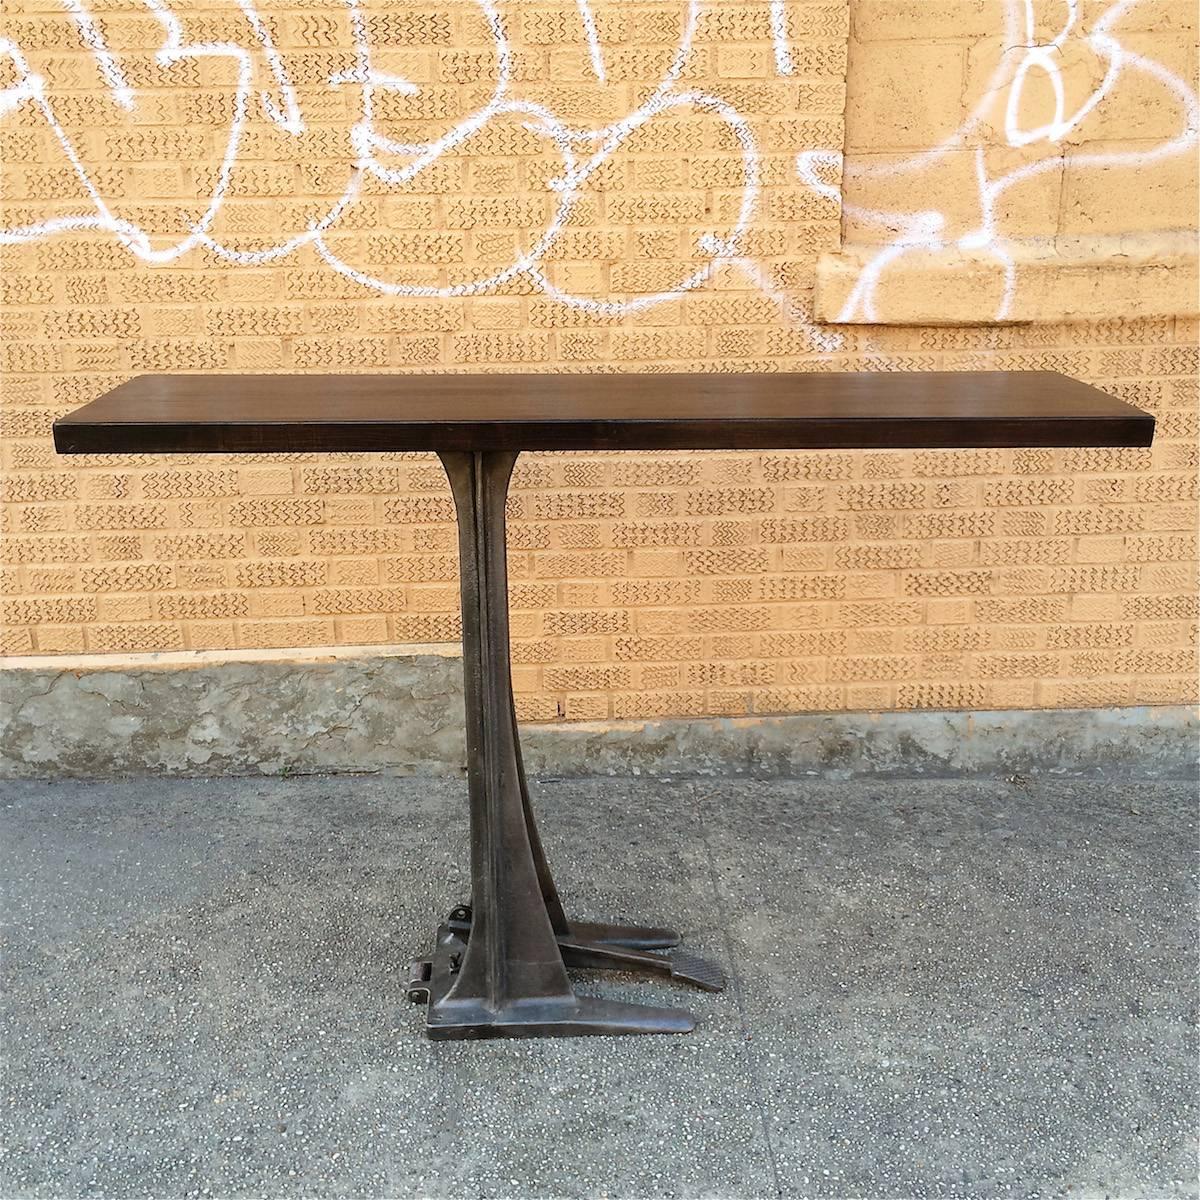 Custom, Industrial, cantilever console or bar assembled from ebonized reclaimed maple block and vintage cast iron machine base assembled by cityFoundry in Brooklyn for our CF Signature Line.